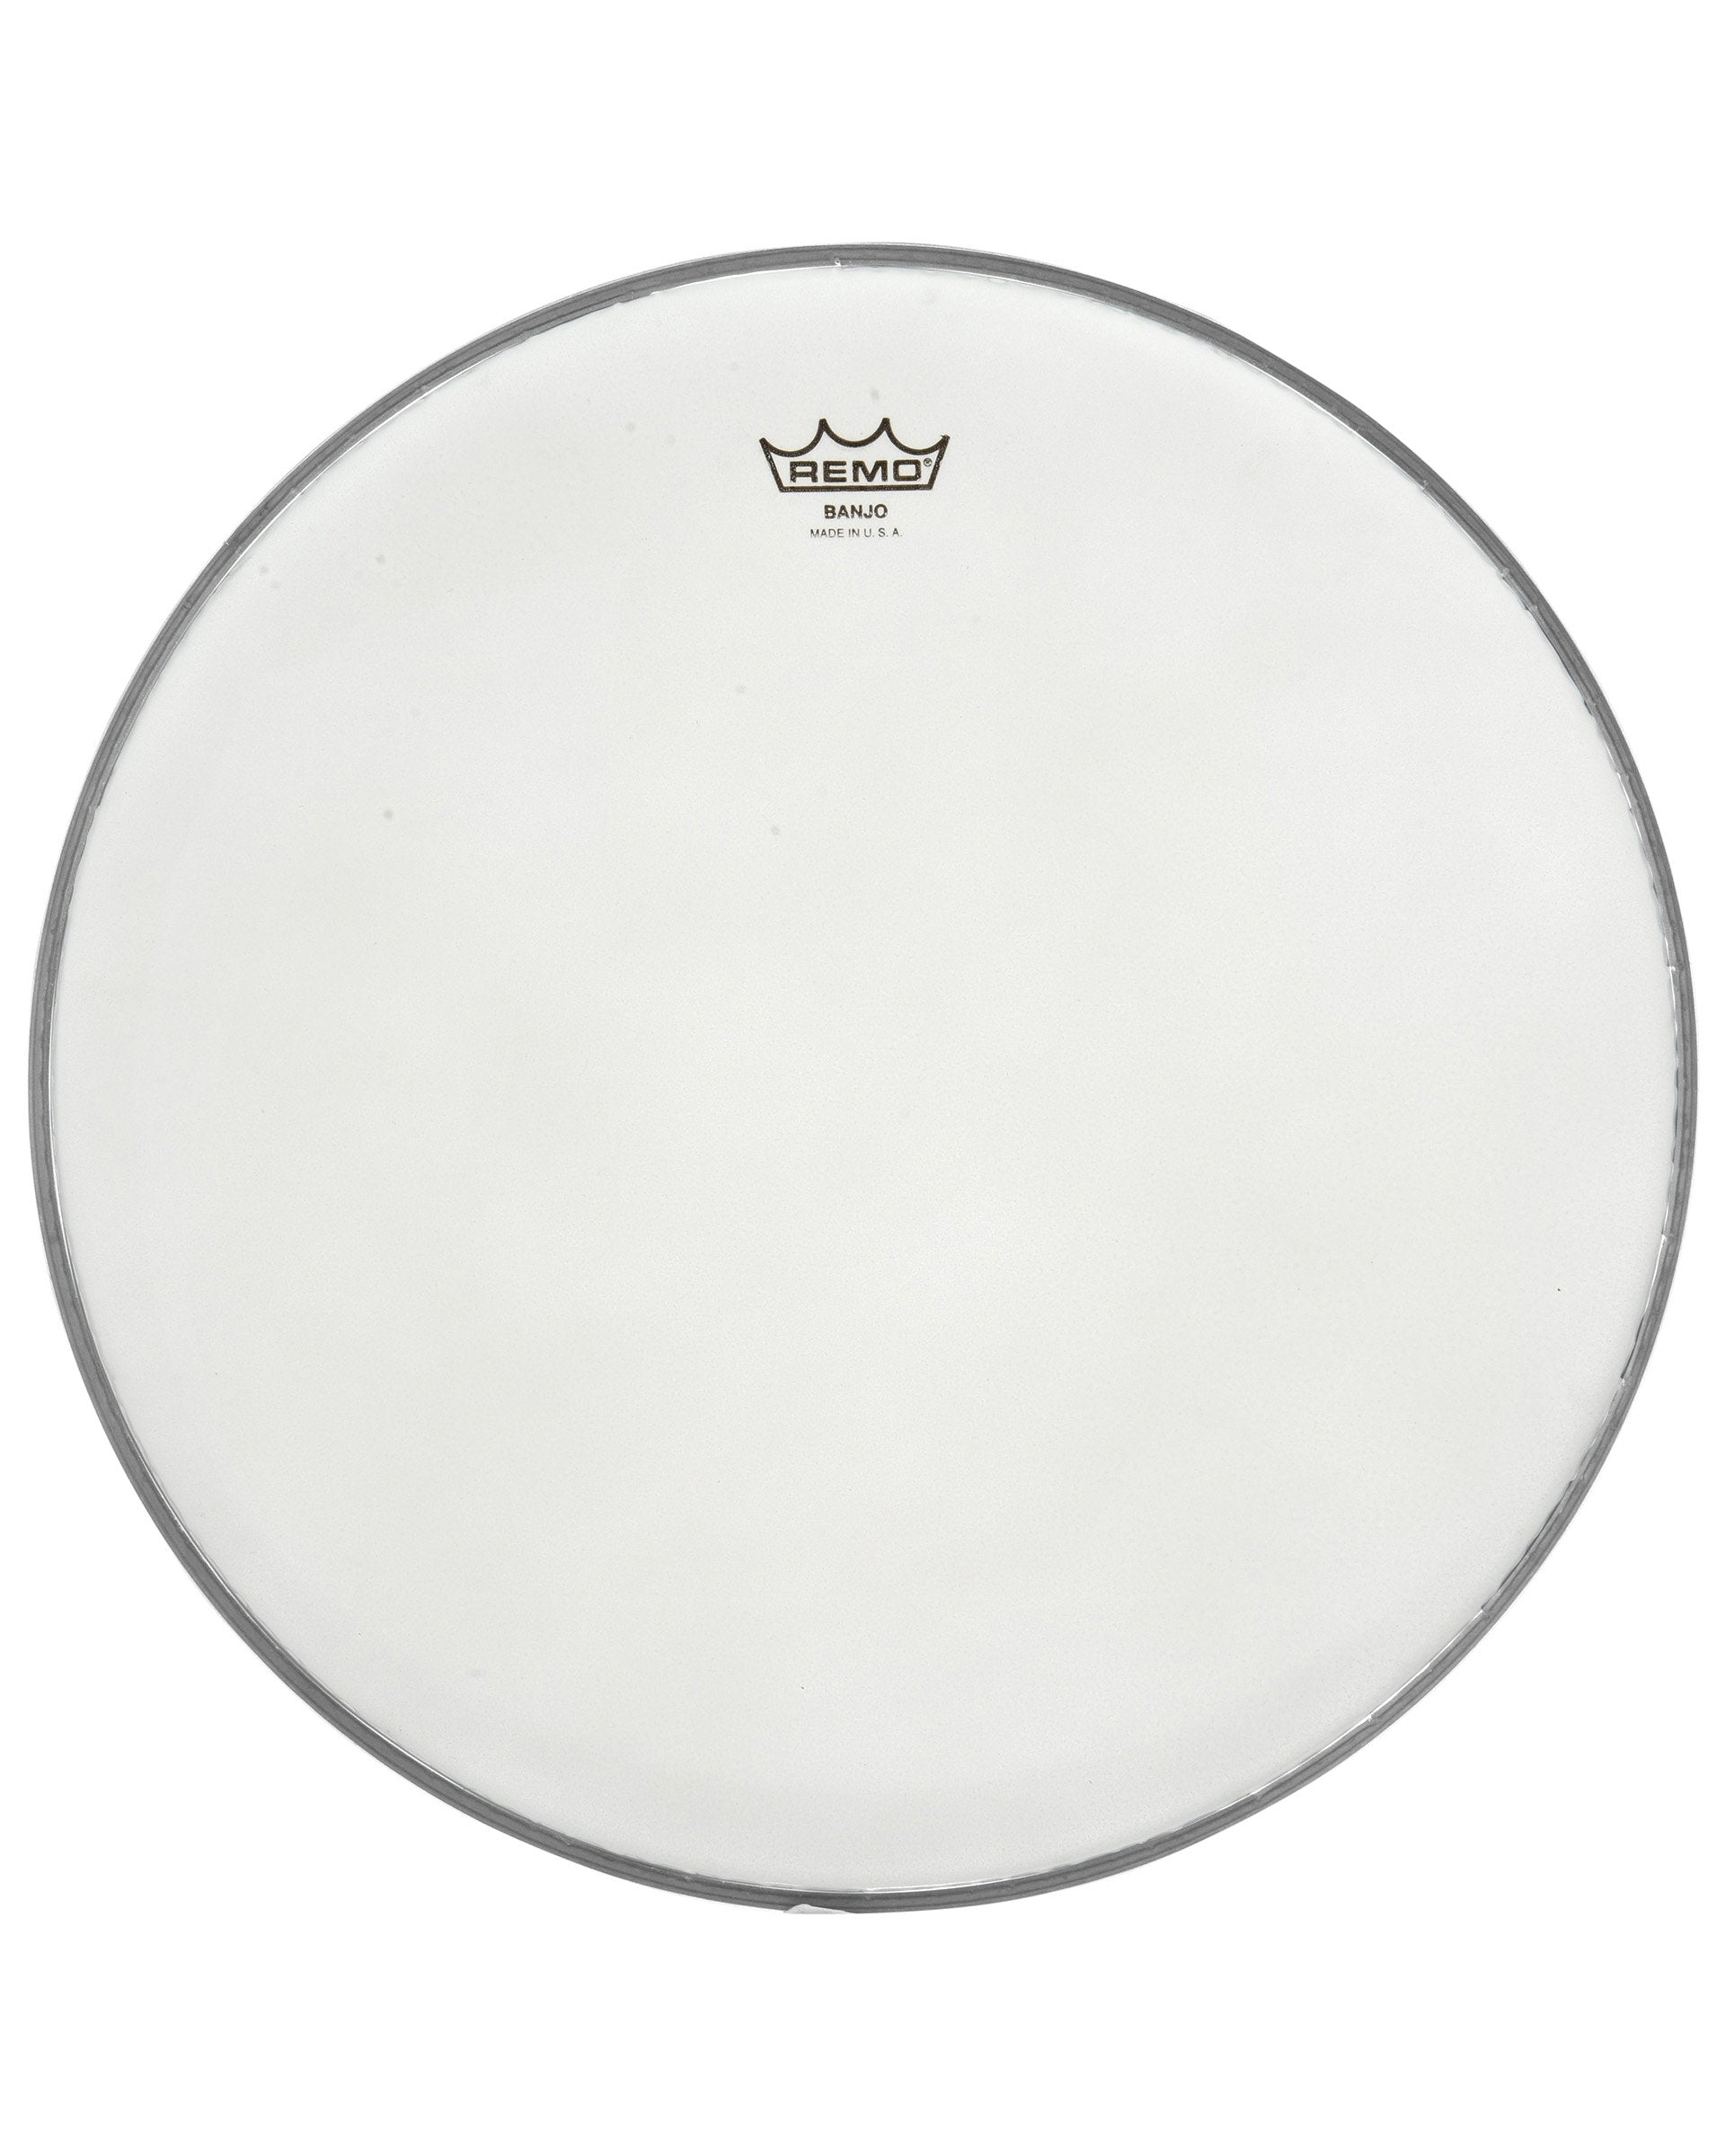 Image 1 of Remo Frosted Bottom Banjo Head, 10 5/8 Inch Diameter, High Crown (1/2 Inch). - SKU# B1010-H-FRB : Product Type Accessories & Parts : Elderly Instruments